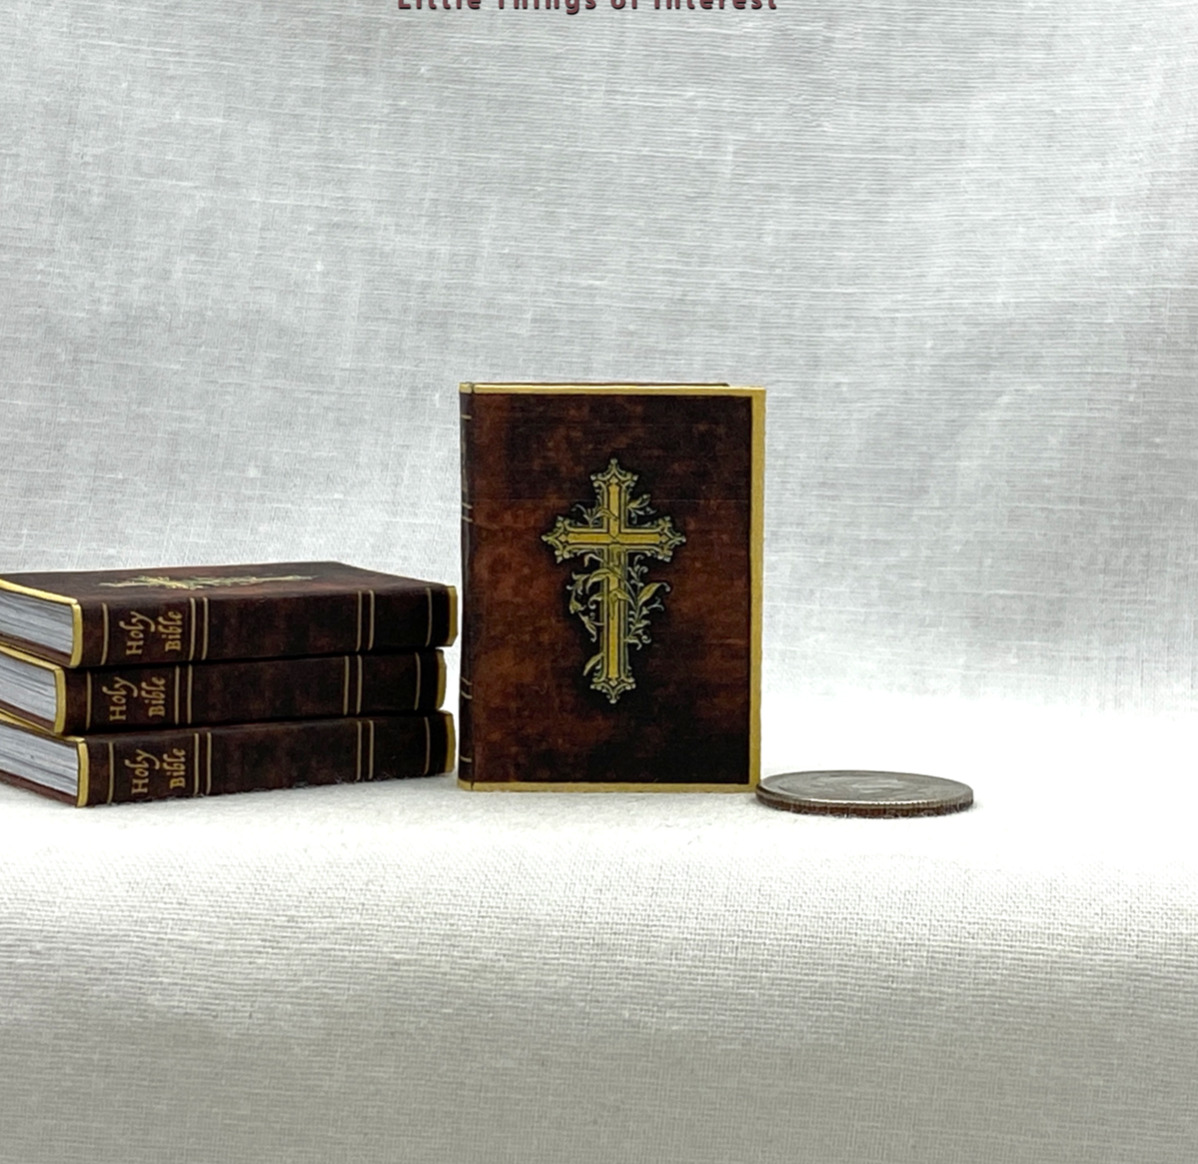 1:6 Scale KING JAMES BIBLE Miniature Readable Playscale Book